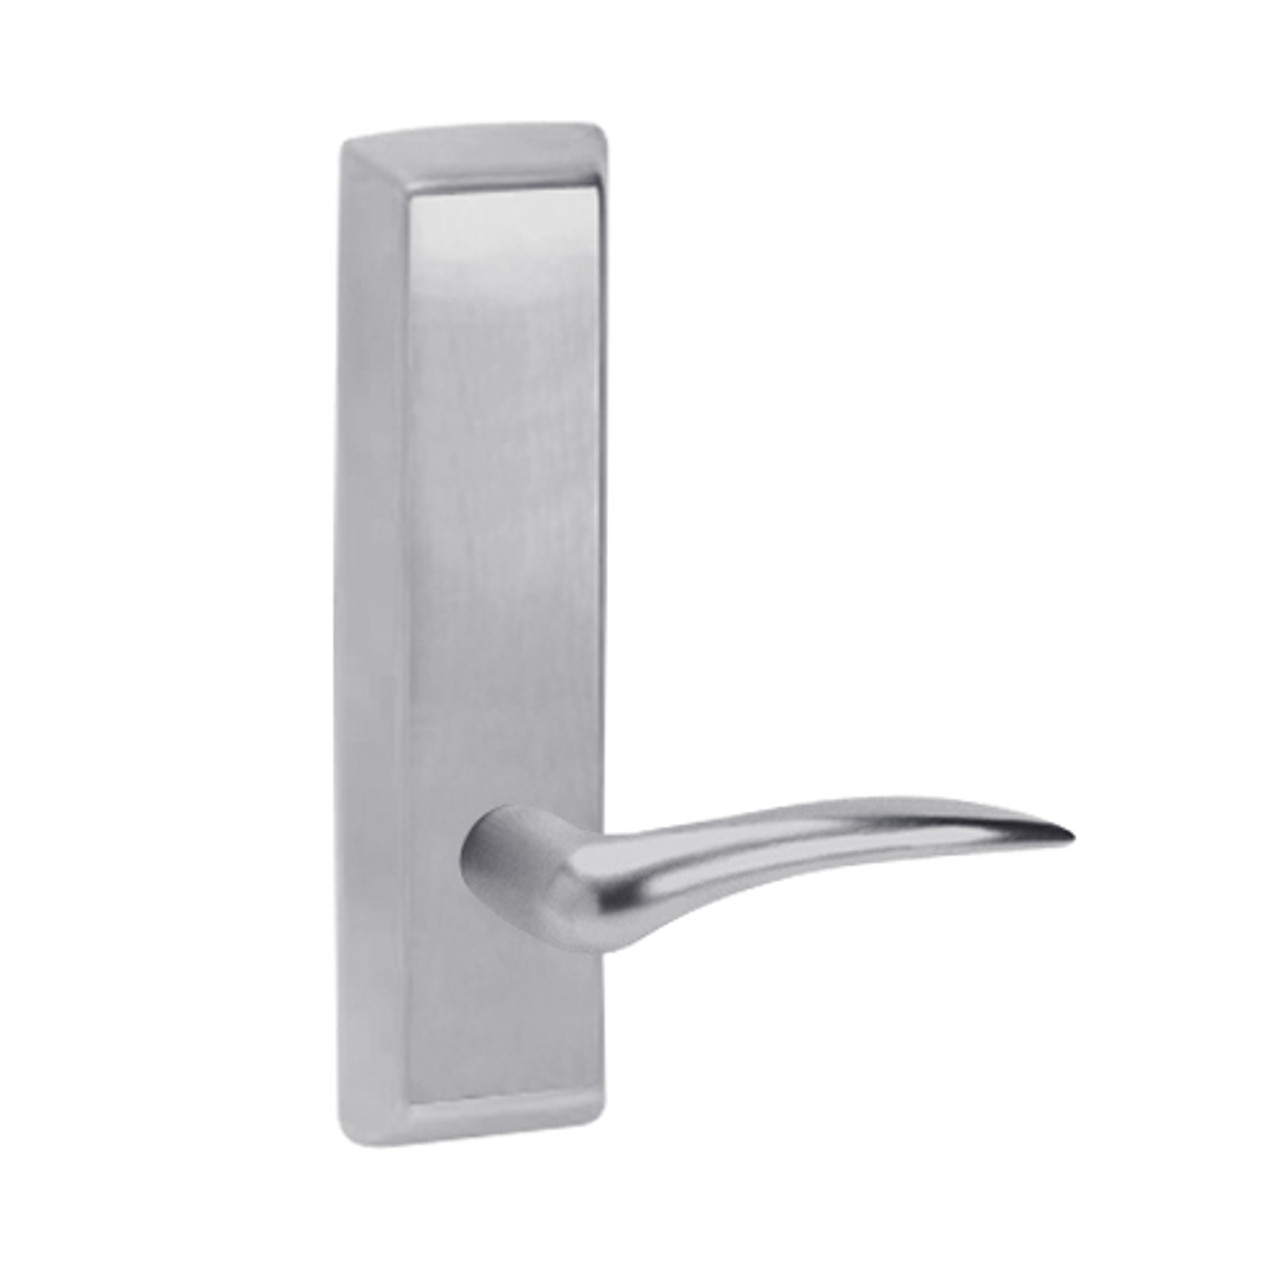 D910-626-RHR Corbin ED5000 Series Exit Device Trim with Passage Dirke Lever in Satin Chrome Finish